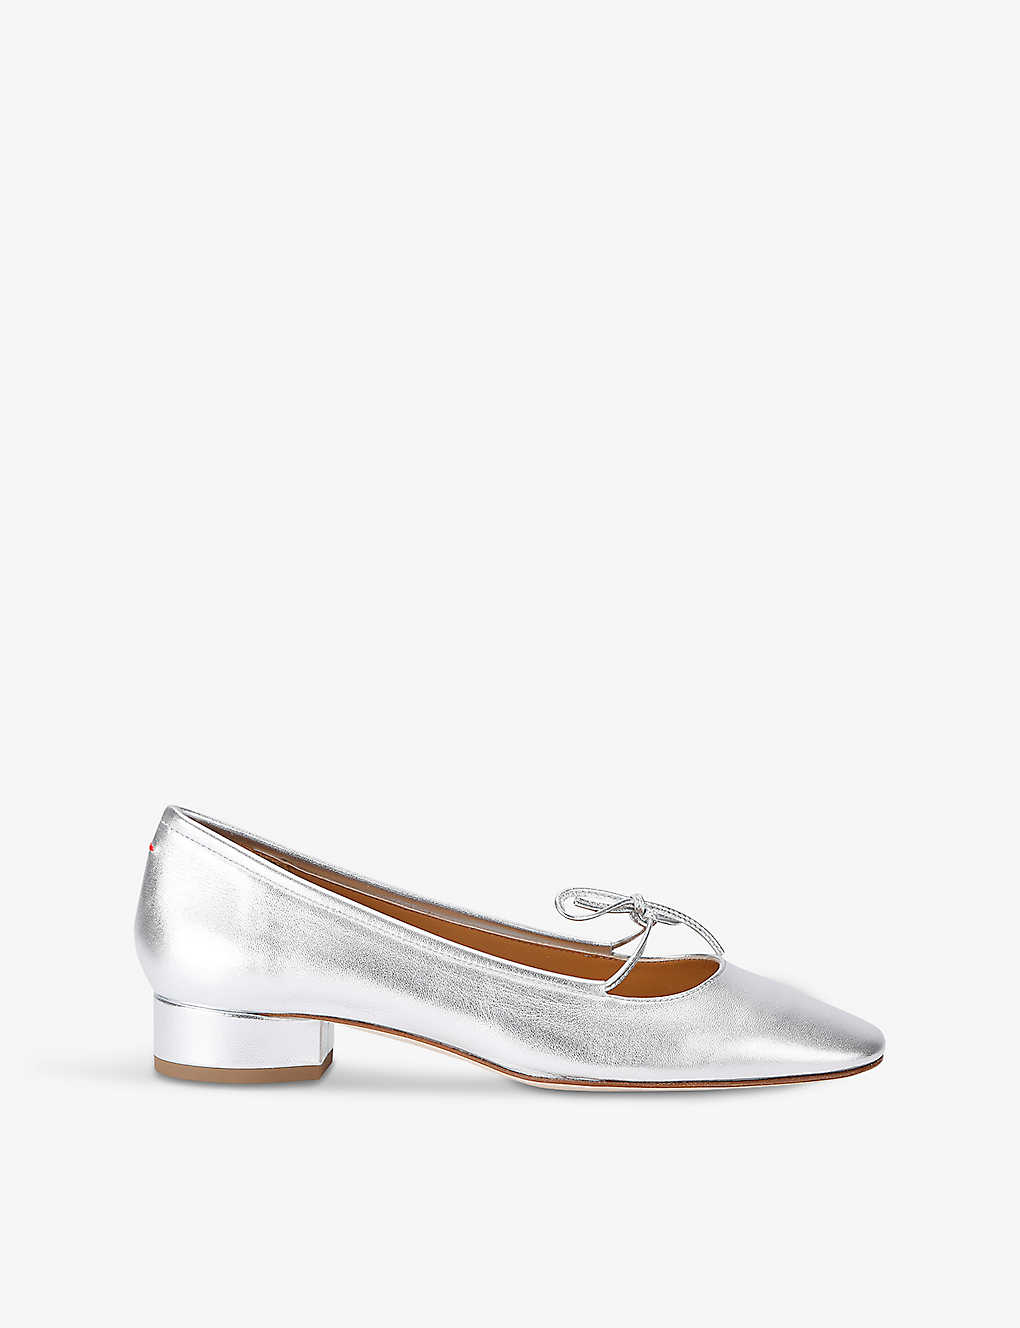 Shop Aeyde Women's Silver Darya Bow-embellished Metallic-leather Heeled Courts